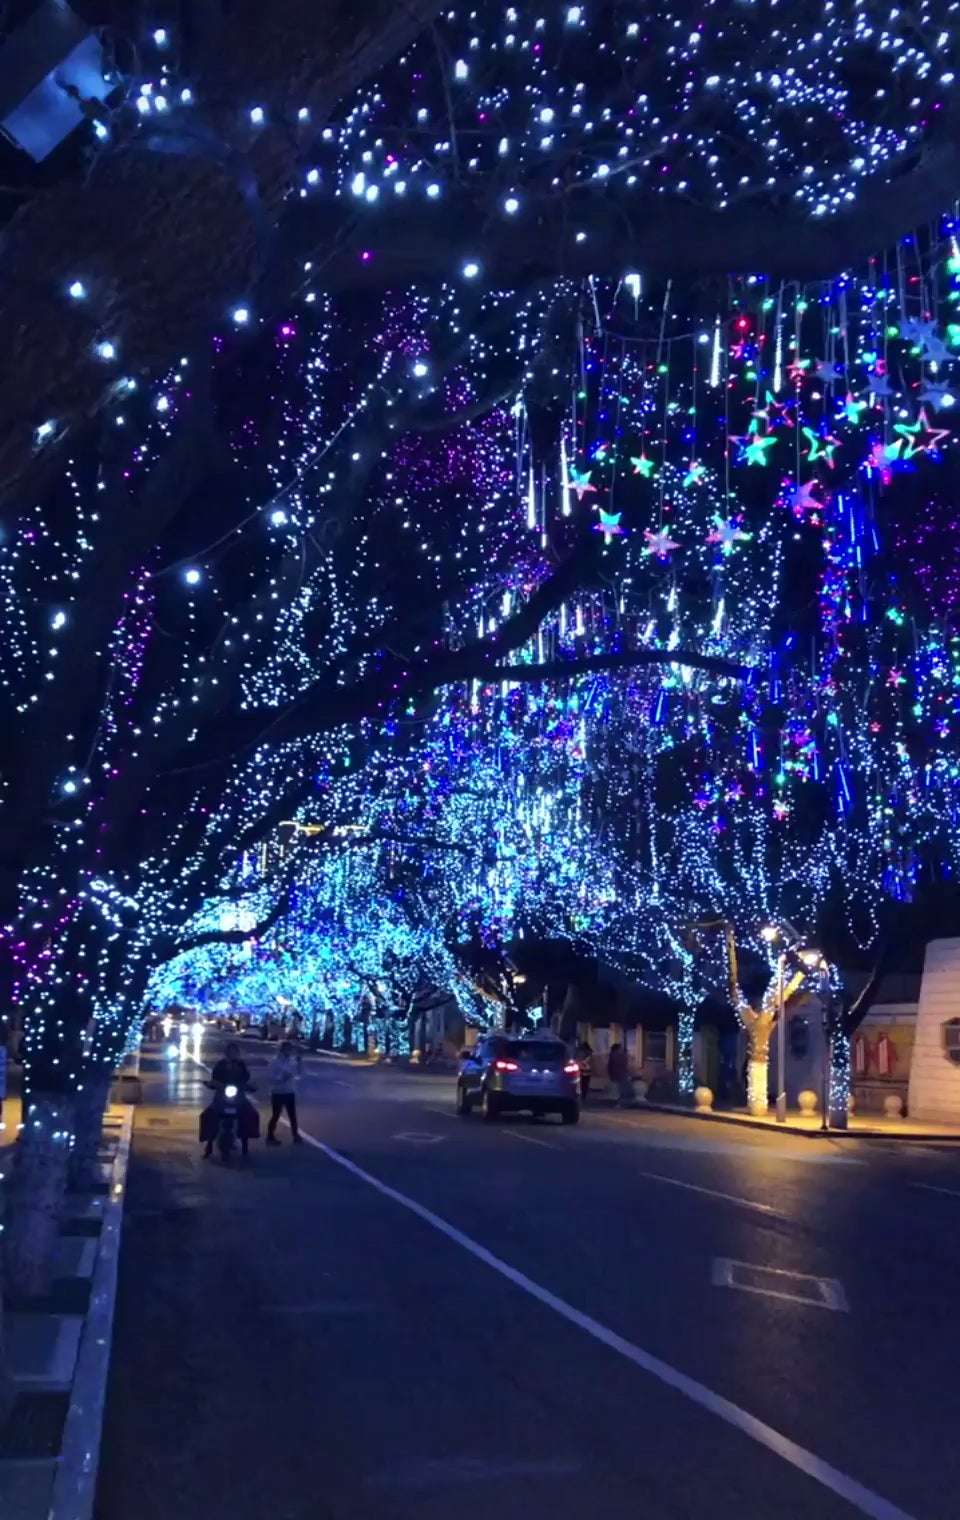 image for This Christmas Lit Street in Detroit : woahdude